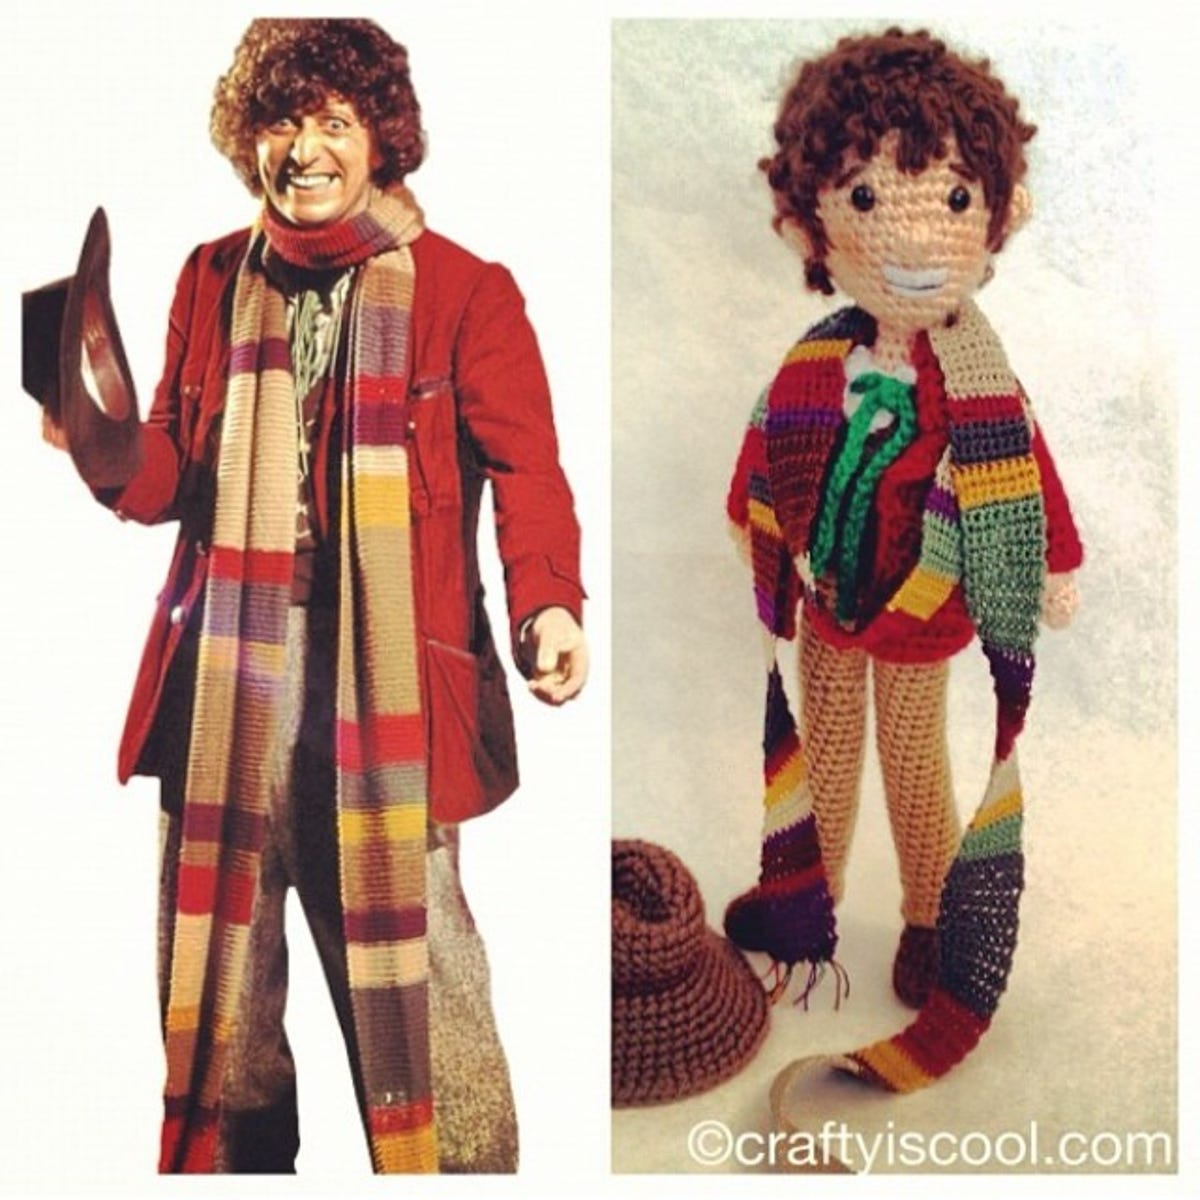 Even Tom Baker's friendly grin is detailed in the amigurumi "Doctor Who" doll made by Allison Hoffman.